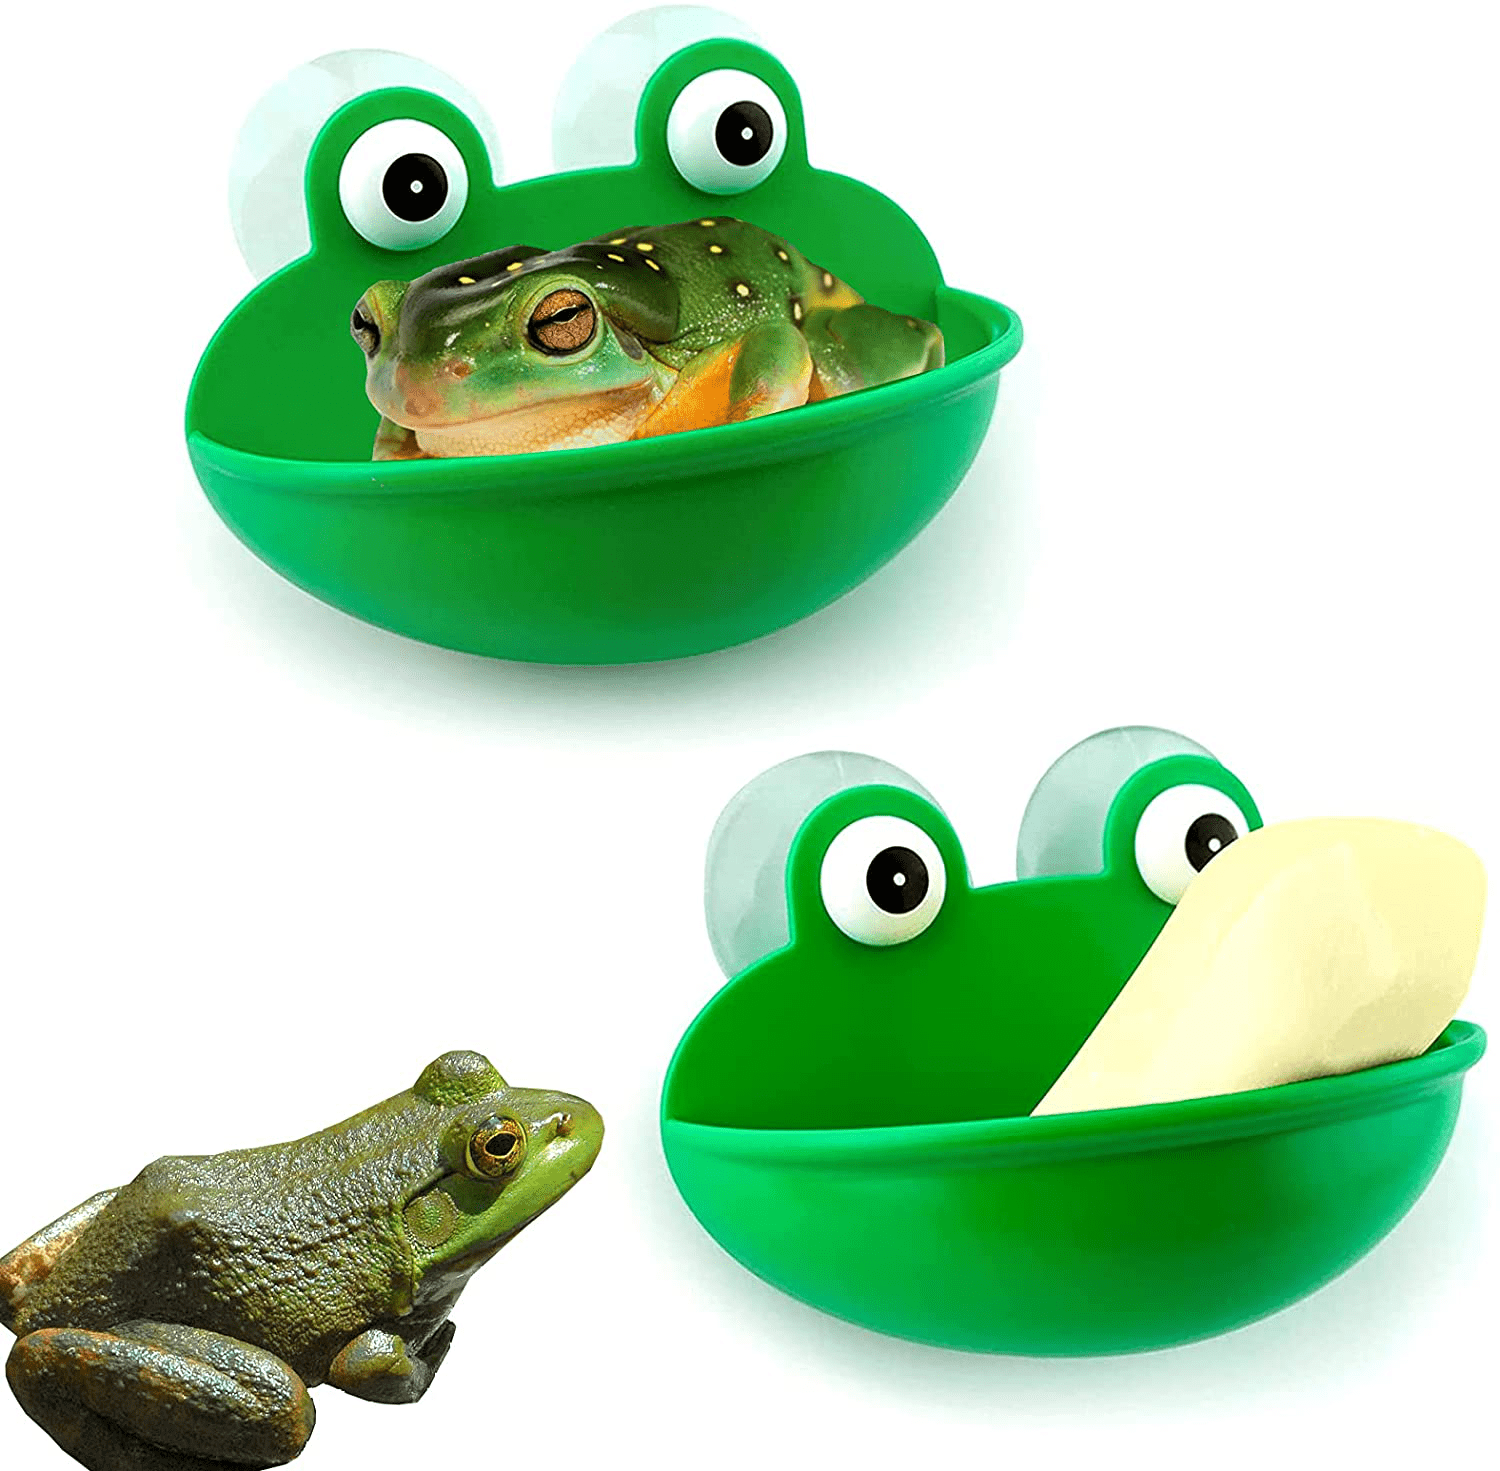 2 Pack Amphibious Aquatic Frog Habitat with Sucker,Cute Aquarium Wall-Mounted Decoration for Frog Toad Lizard Gecko Tortoise and Other Small Aquatic Animals